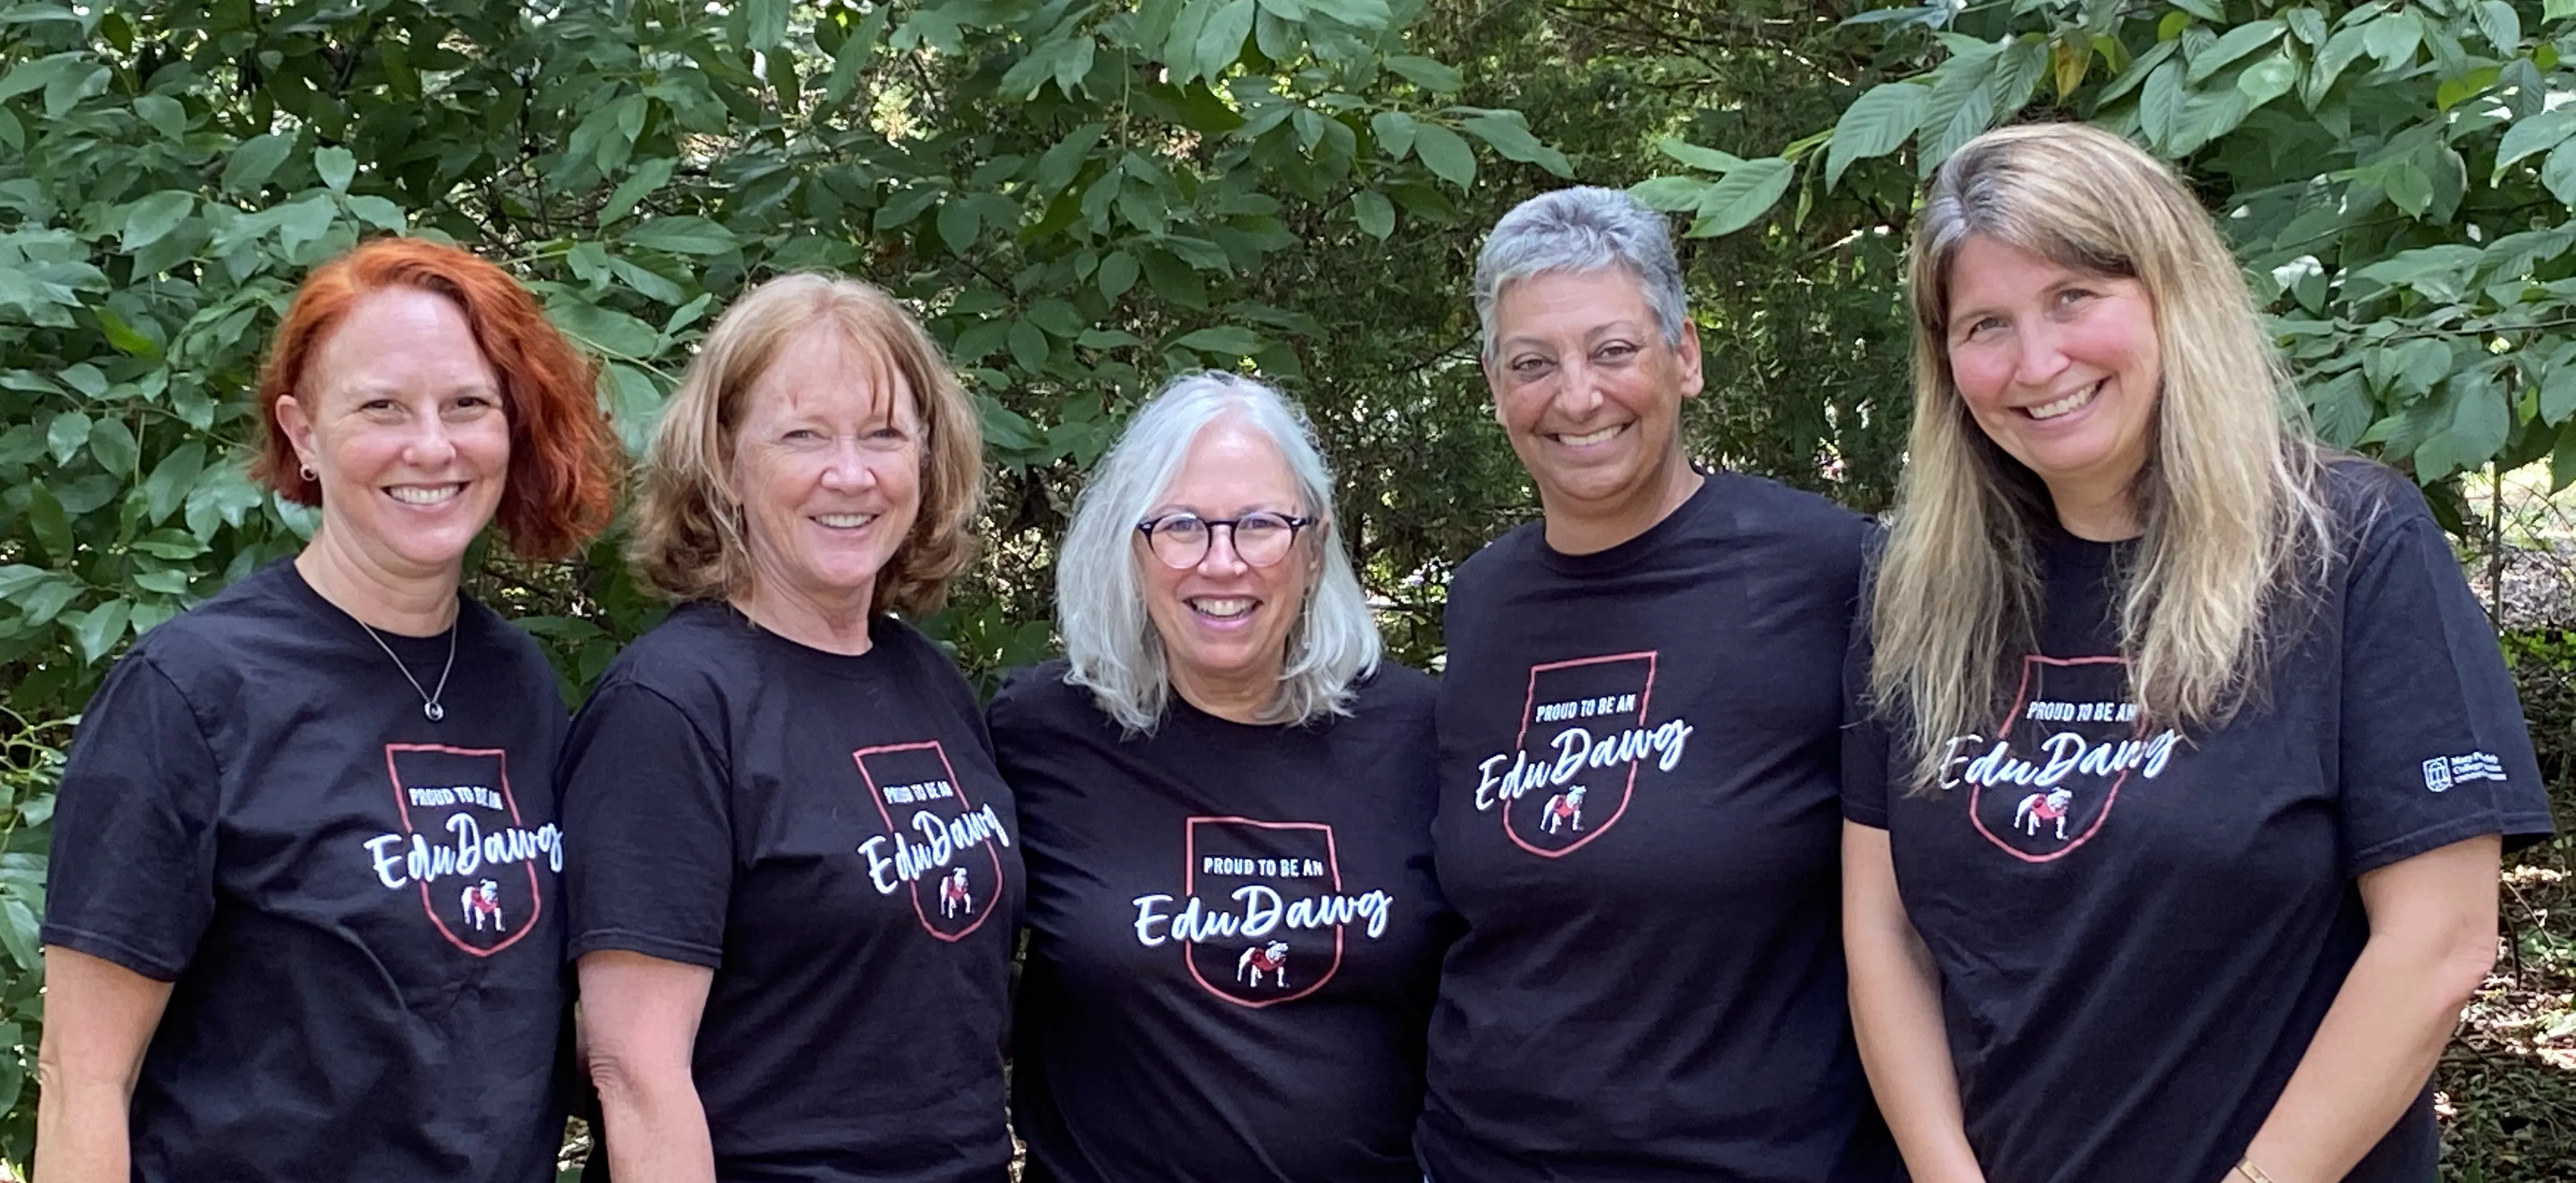 photo of GSAP Team members, standing outside with arms around each other, all wearing t-shirts that say &ldquo;Proud to be an EduDawg&rdquo;